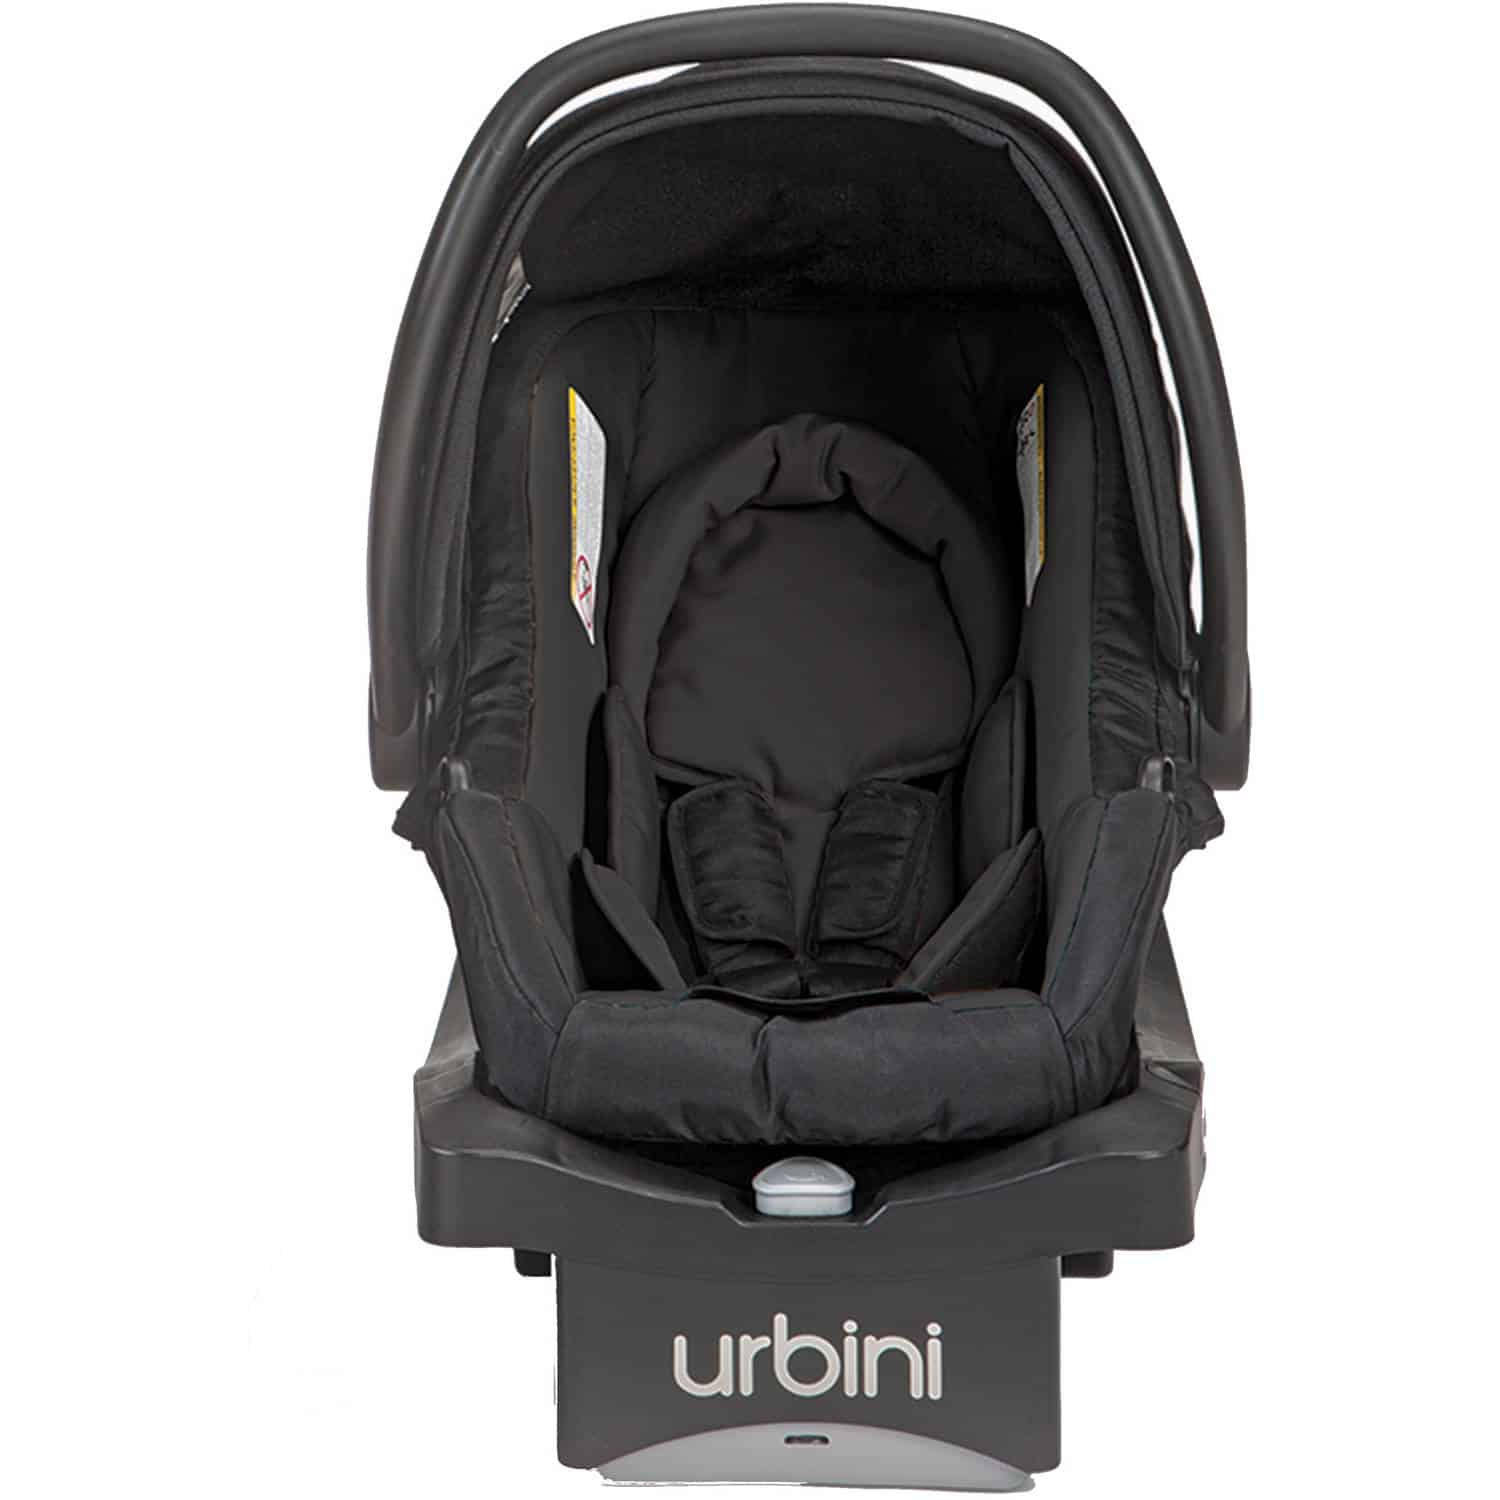 strollers compatible with urbini car seat